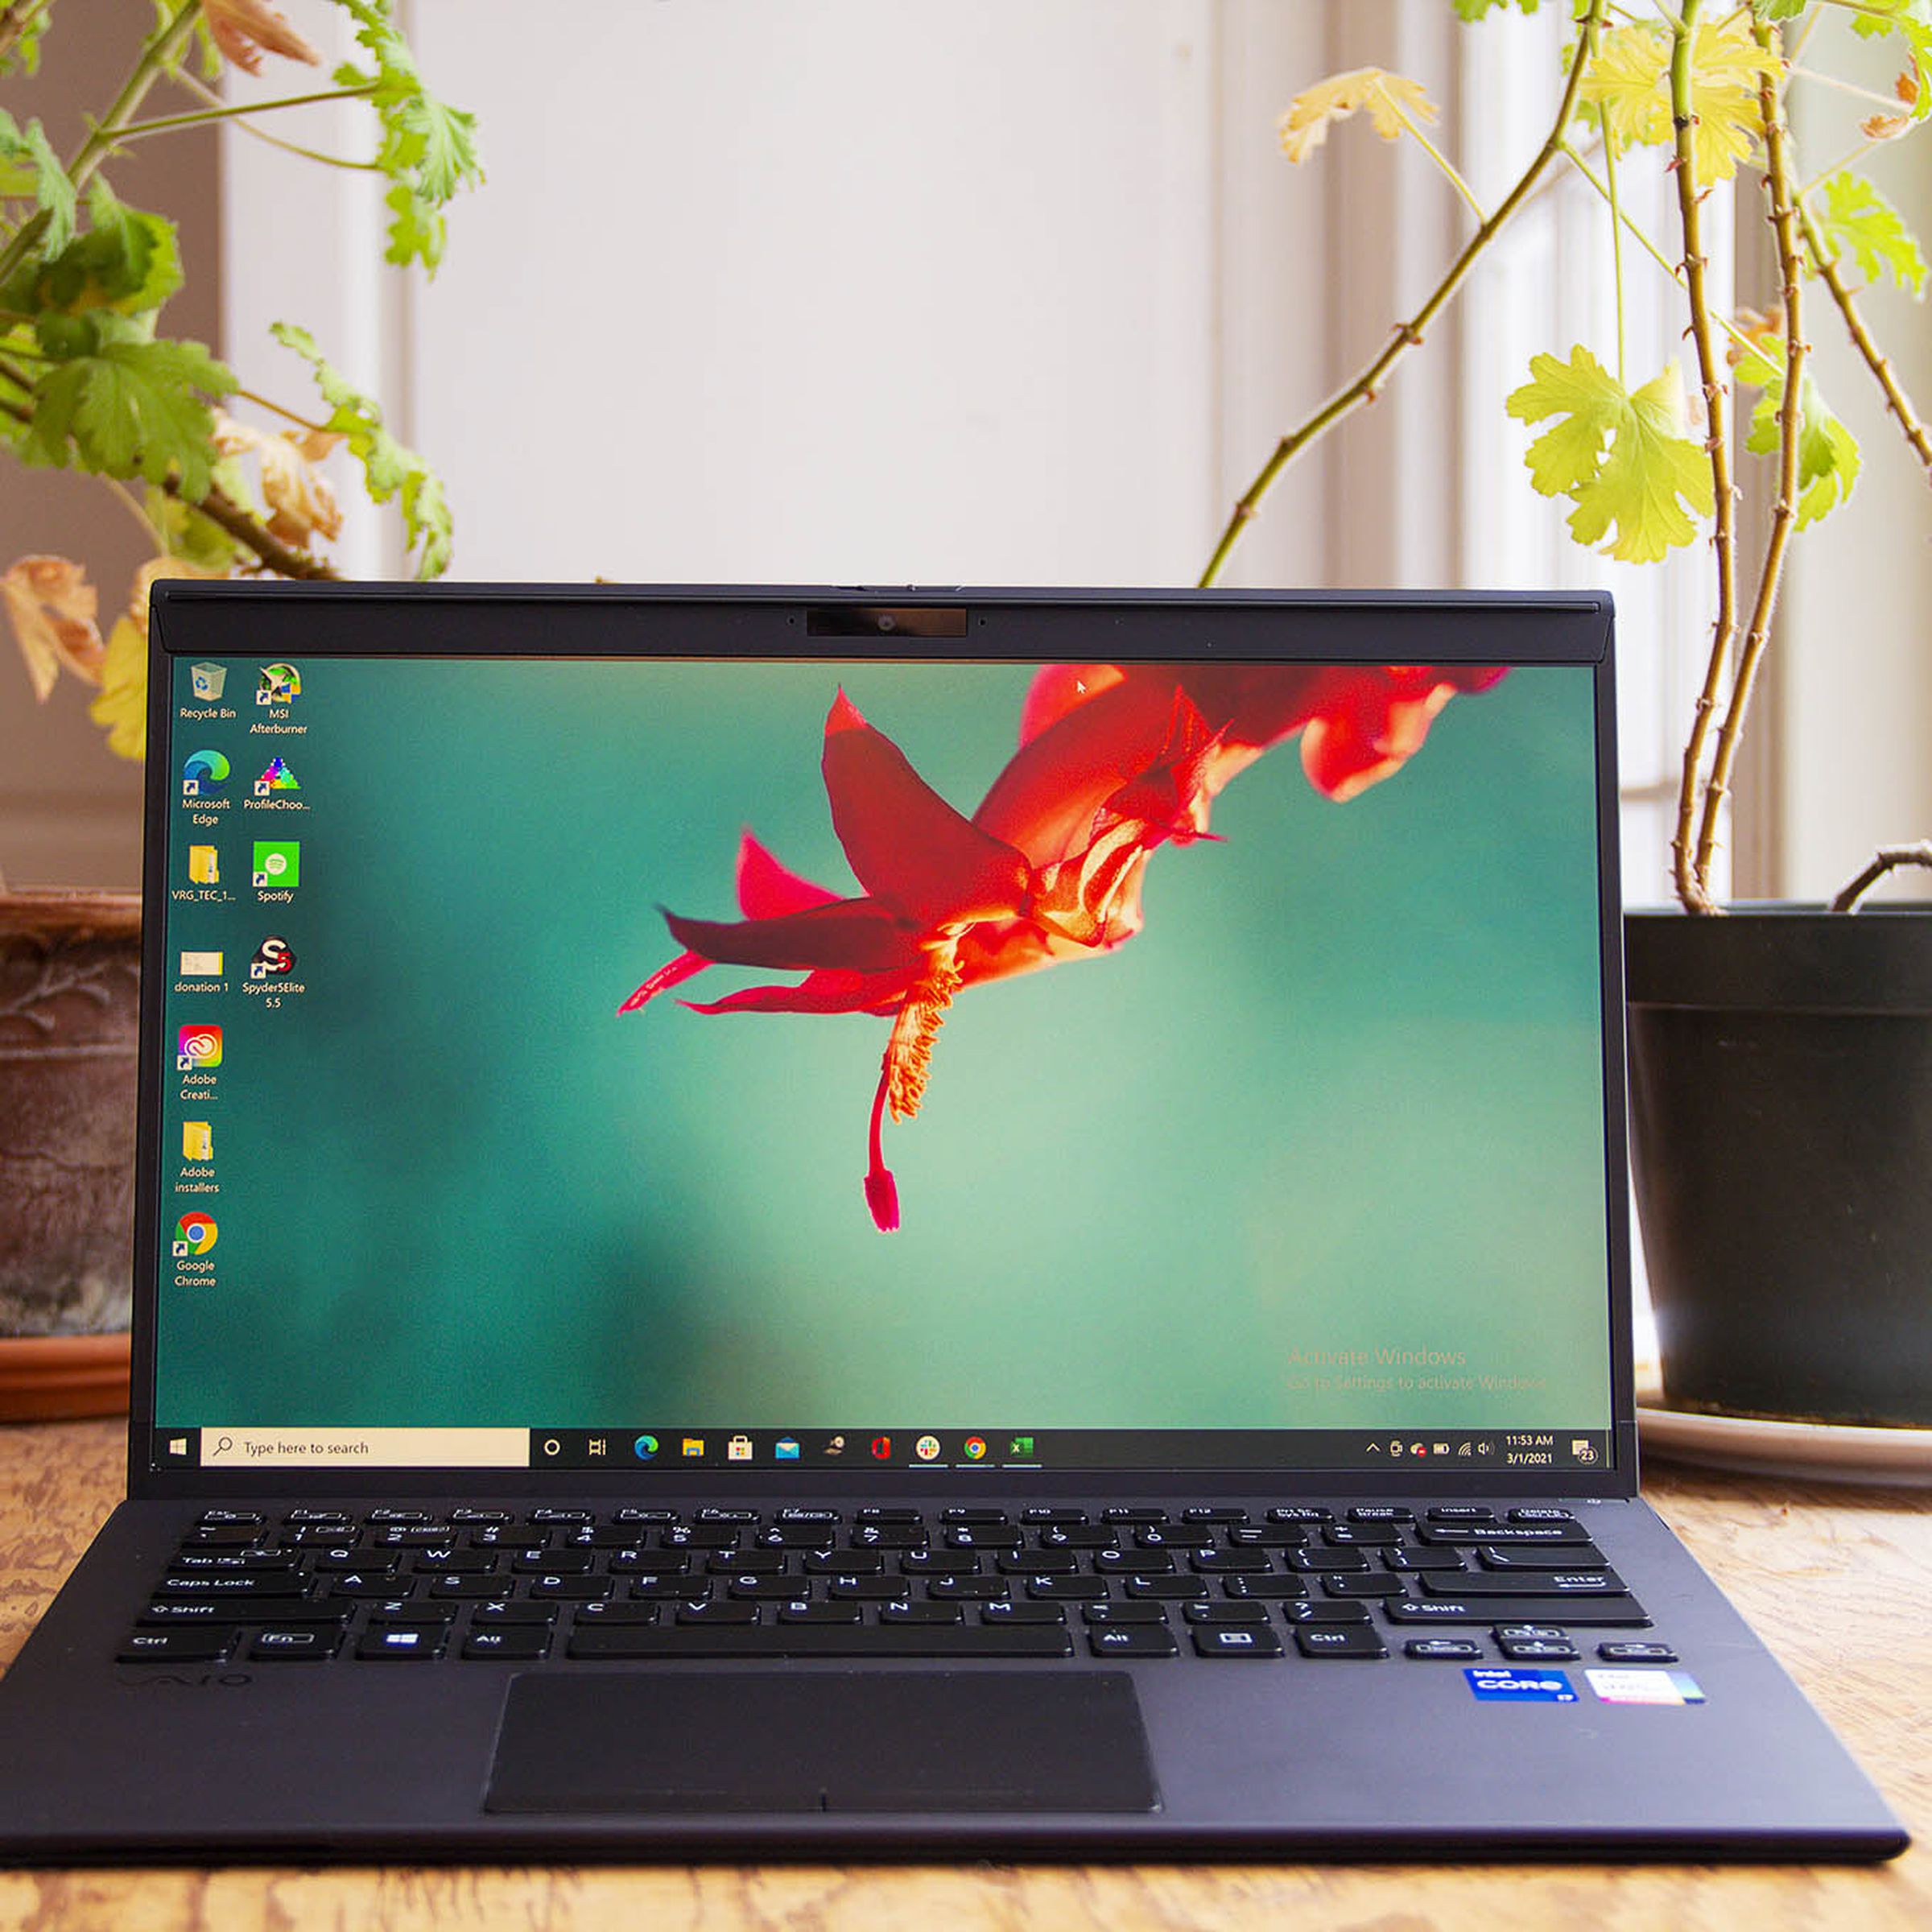 The Vaio Z laptop on a table with two plants in the background. The screen displays a red flower on a blue background.